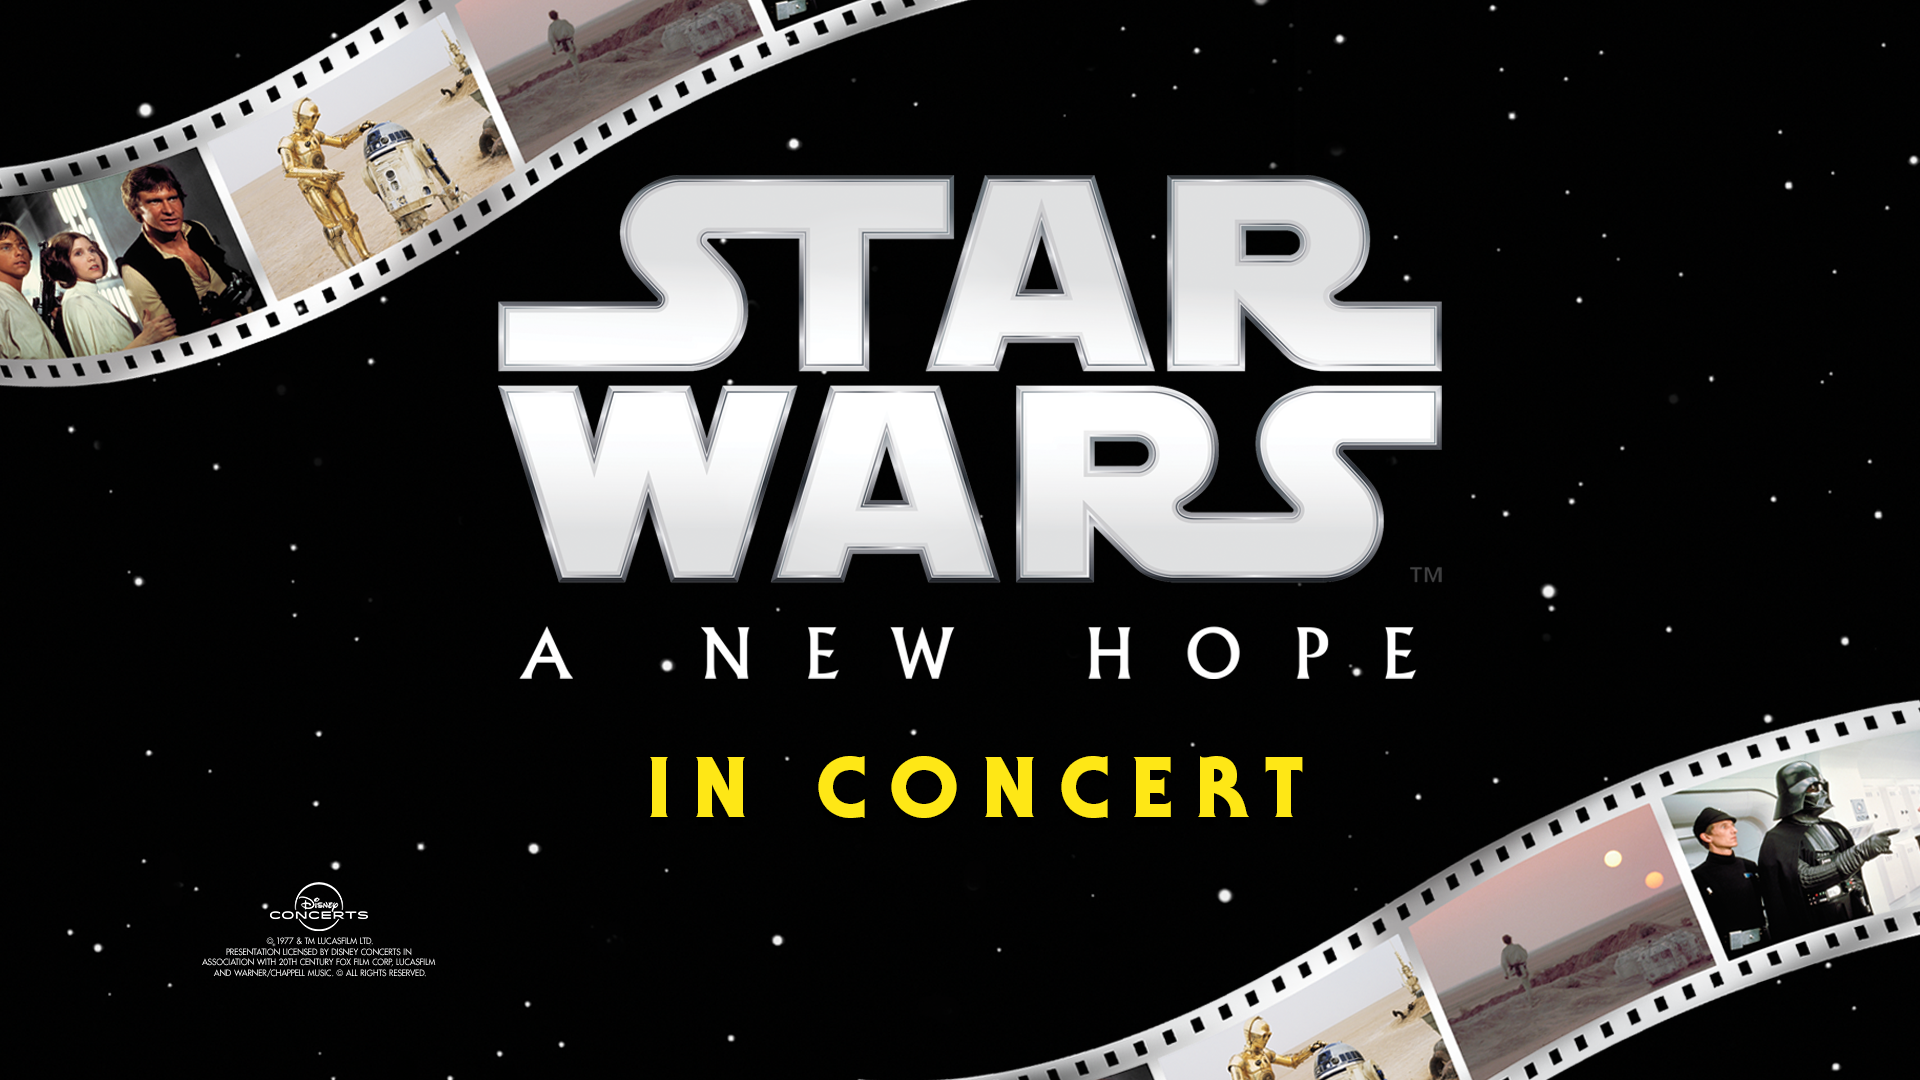 Star Wars concert by Rotterdam Philharmonic: A new hope